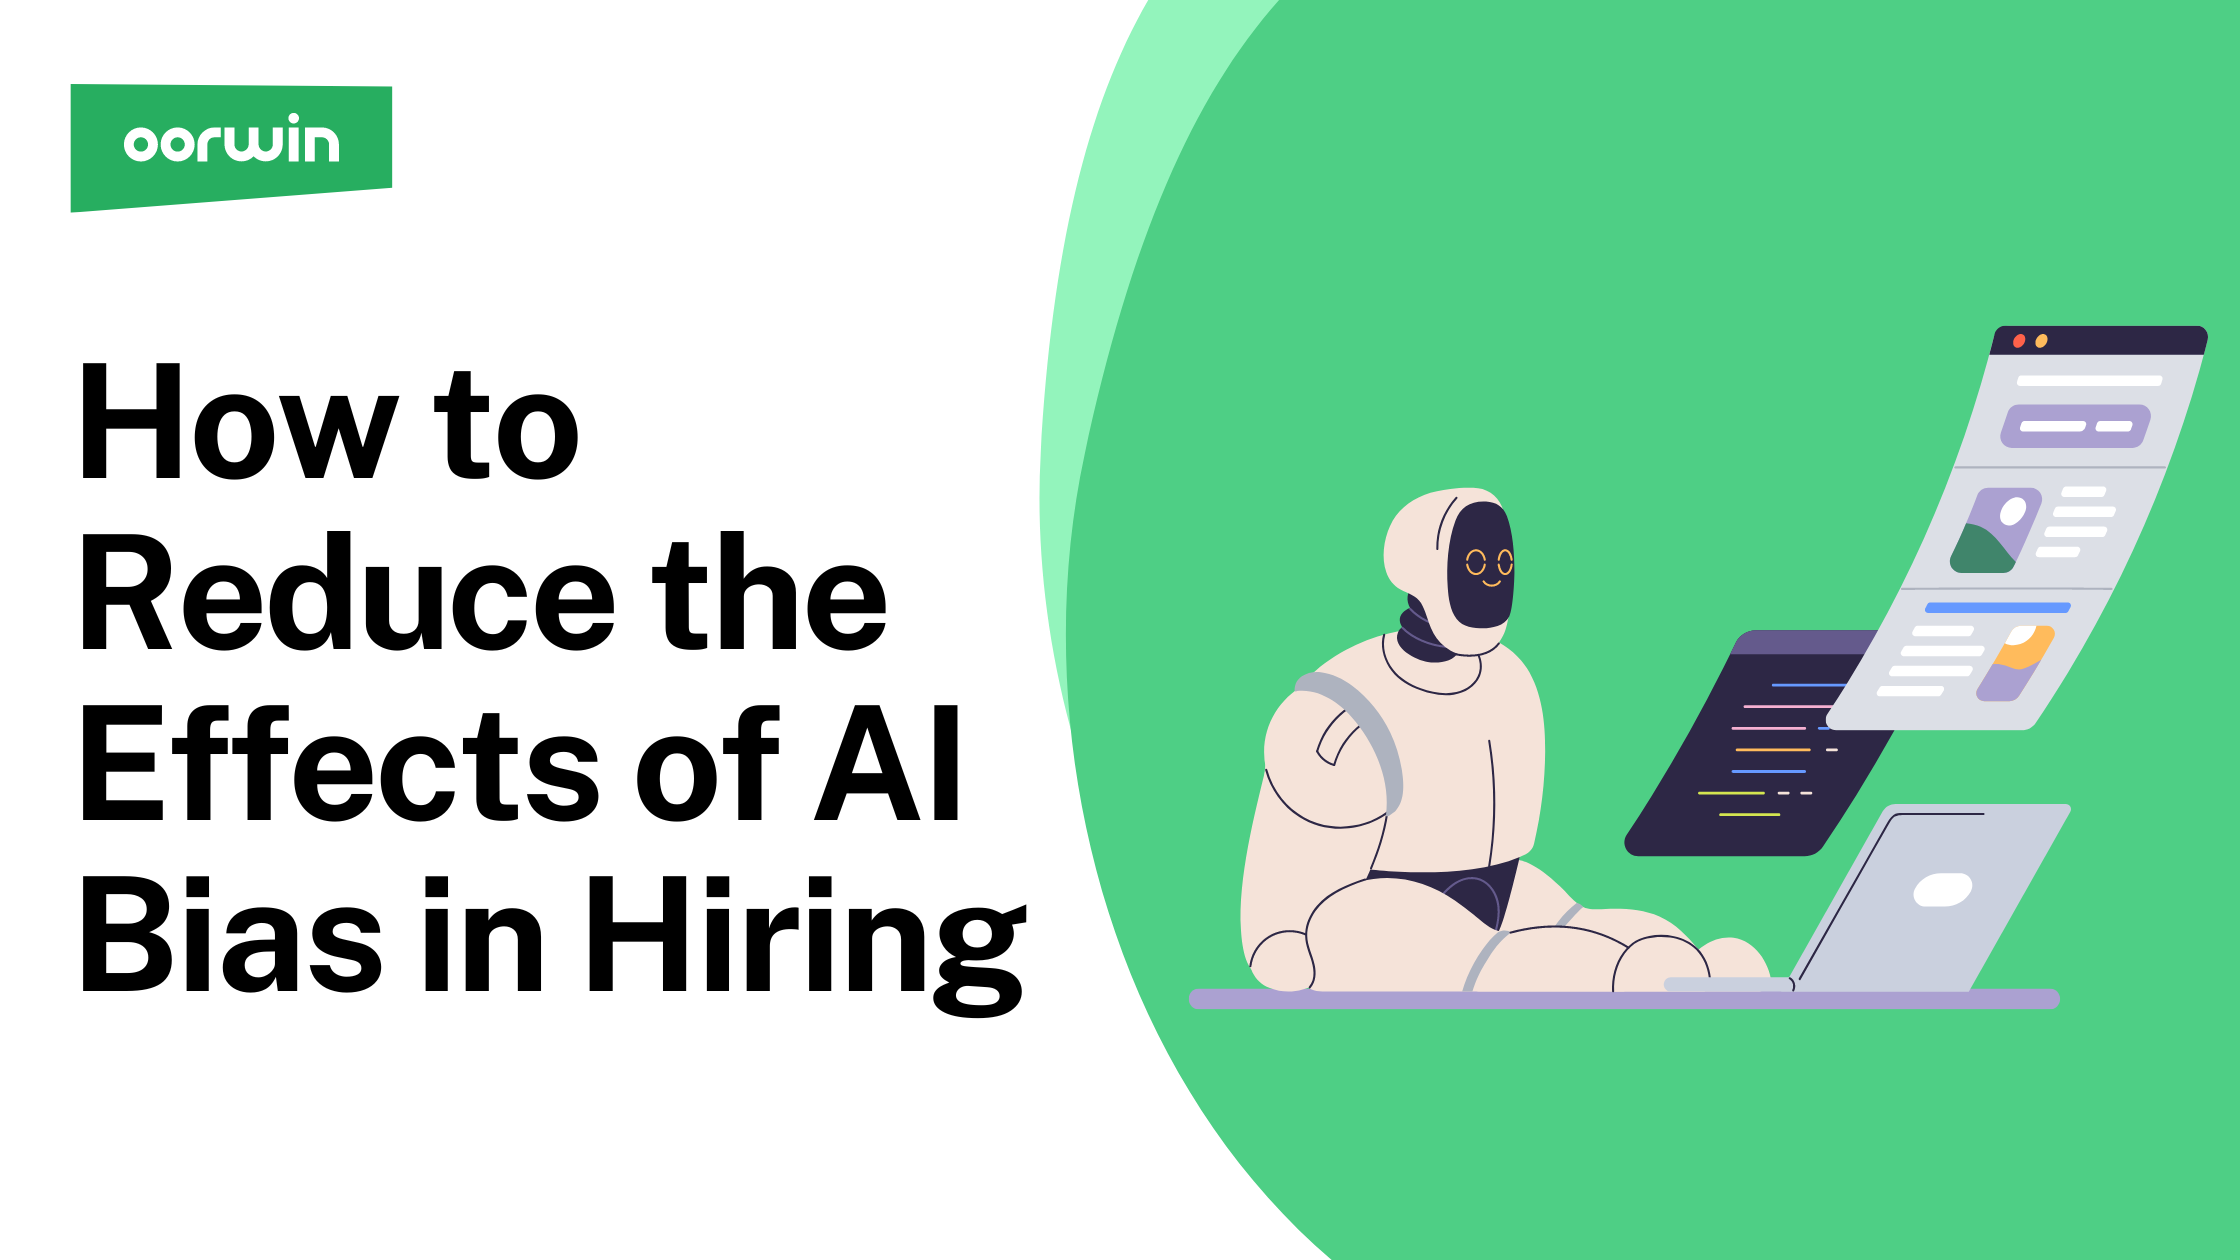 How to Reduce the Effects of AI Bias in Hiring